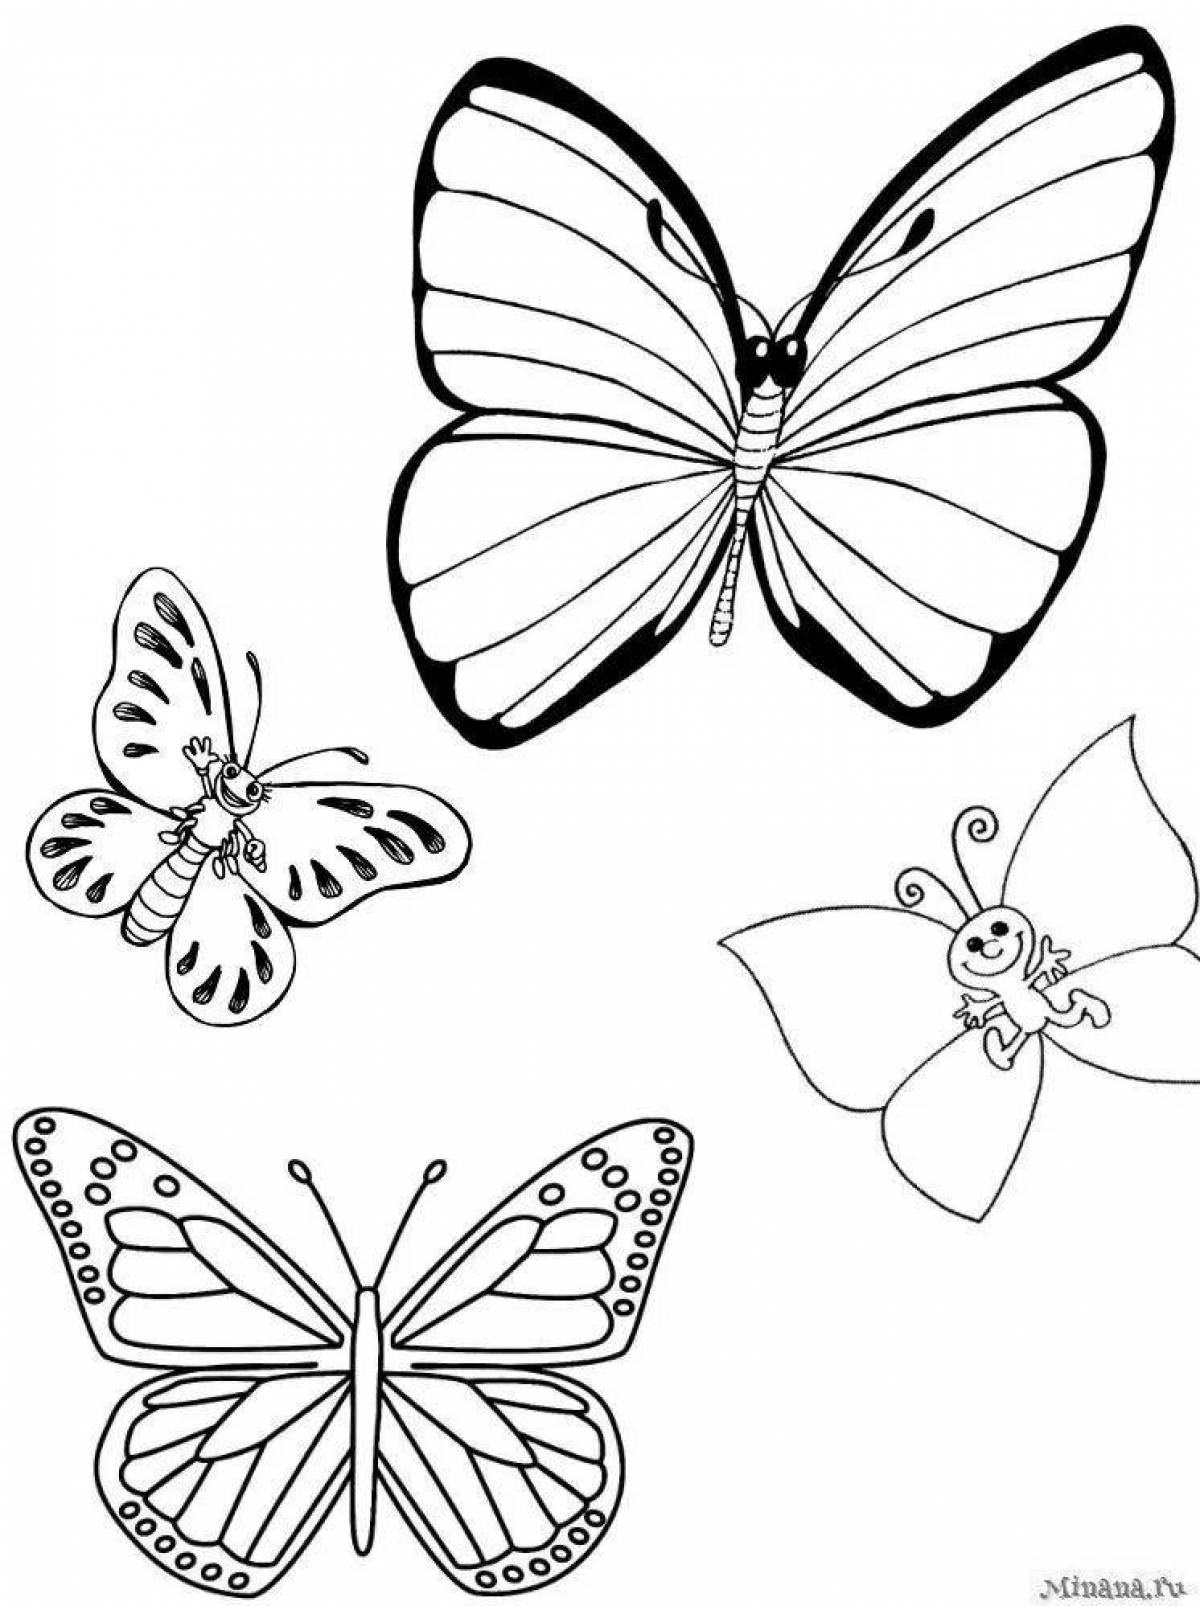 Exciting butterfly coloring pages